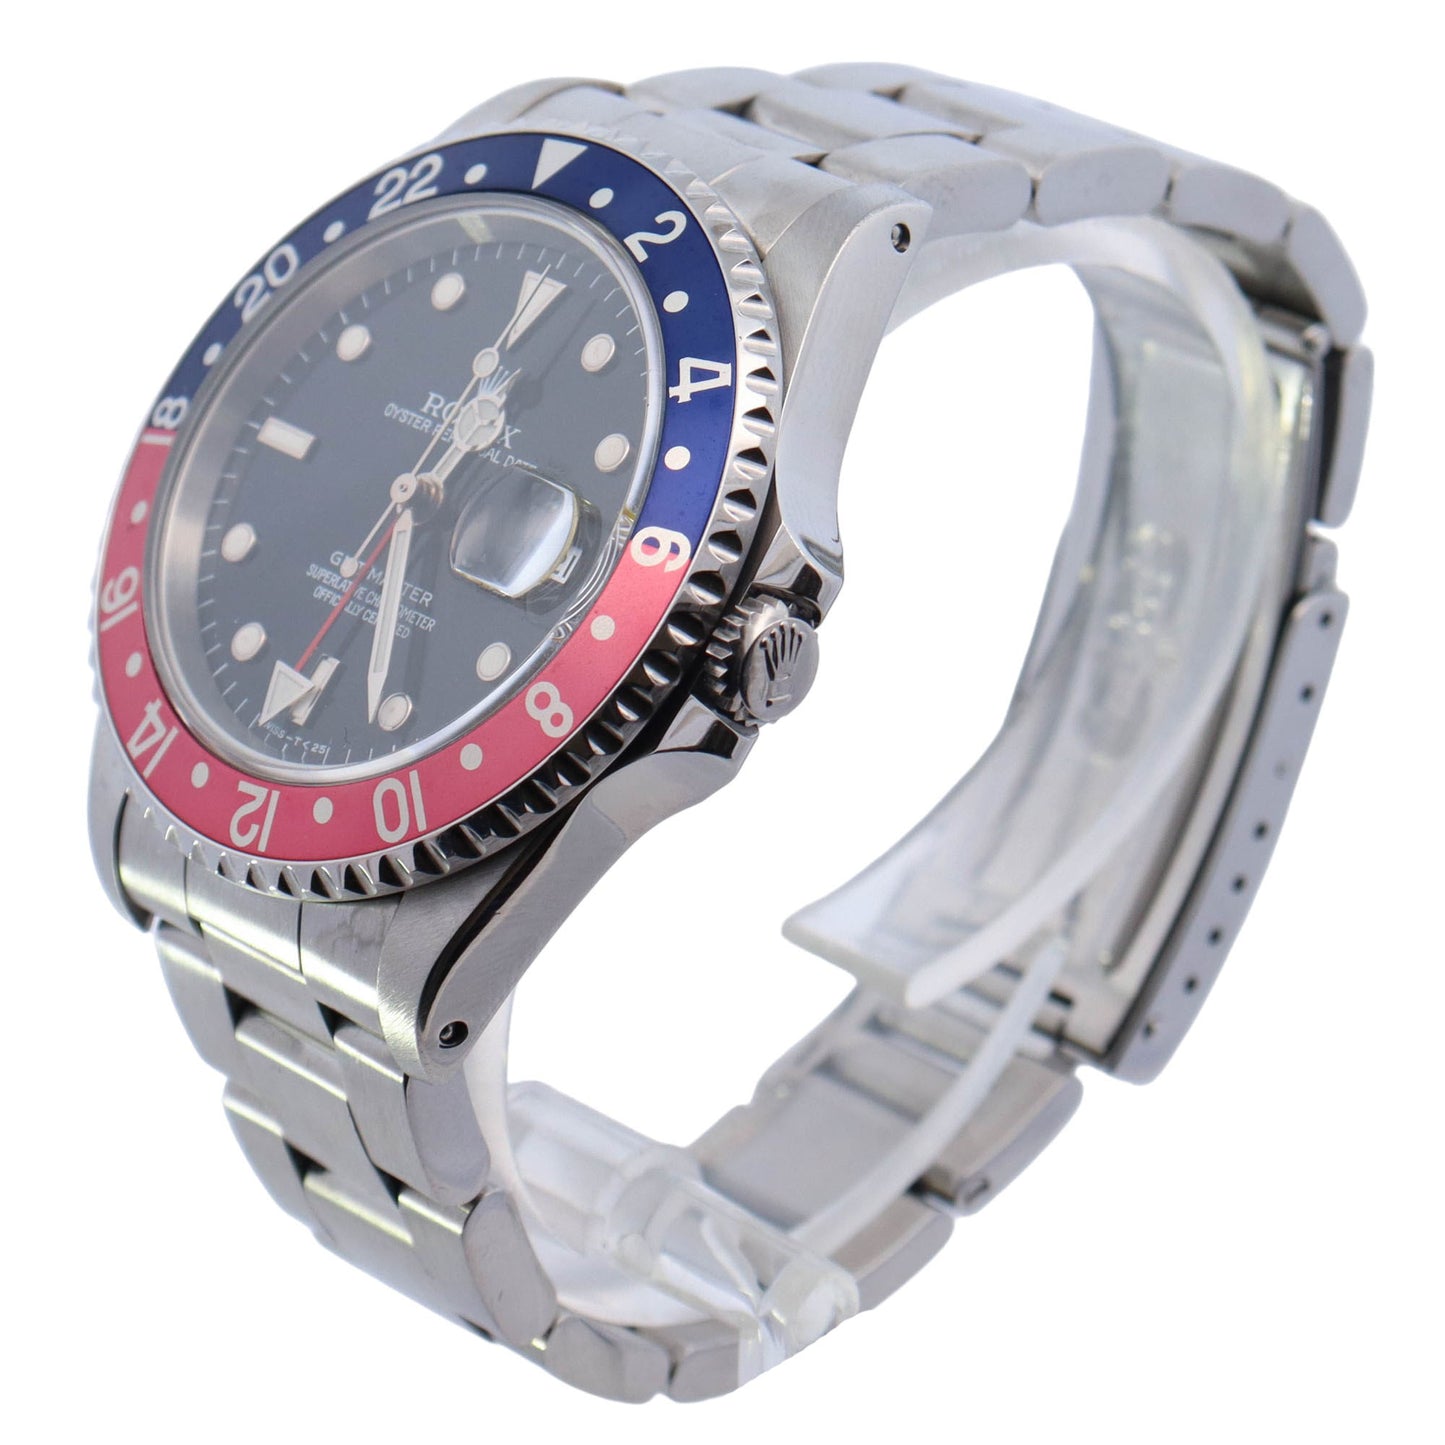 Rolex GMT-Master "Pepsi" Stainless Steel 40mm Black Dot Dial Watch Reference# 16700